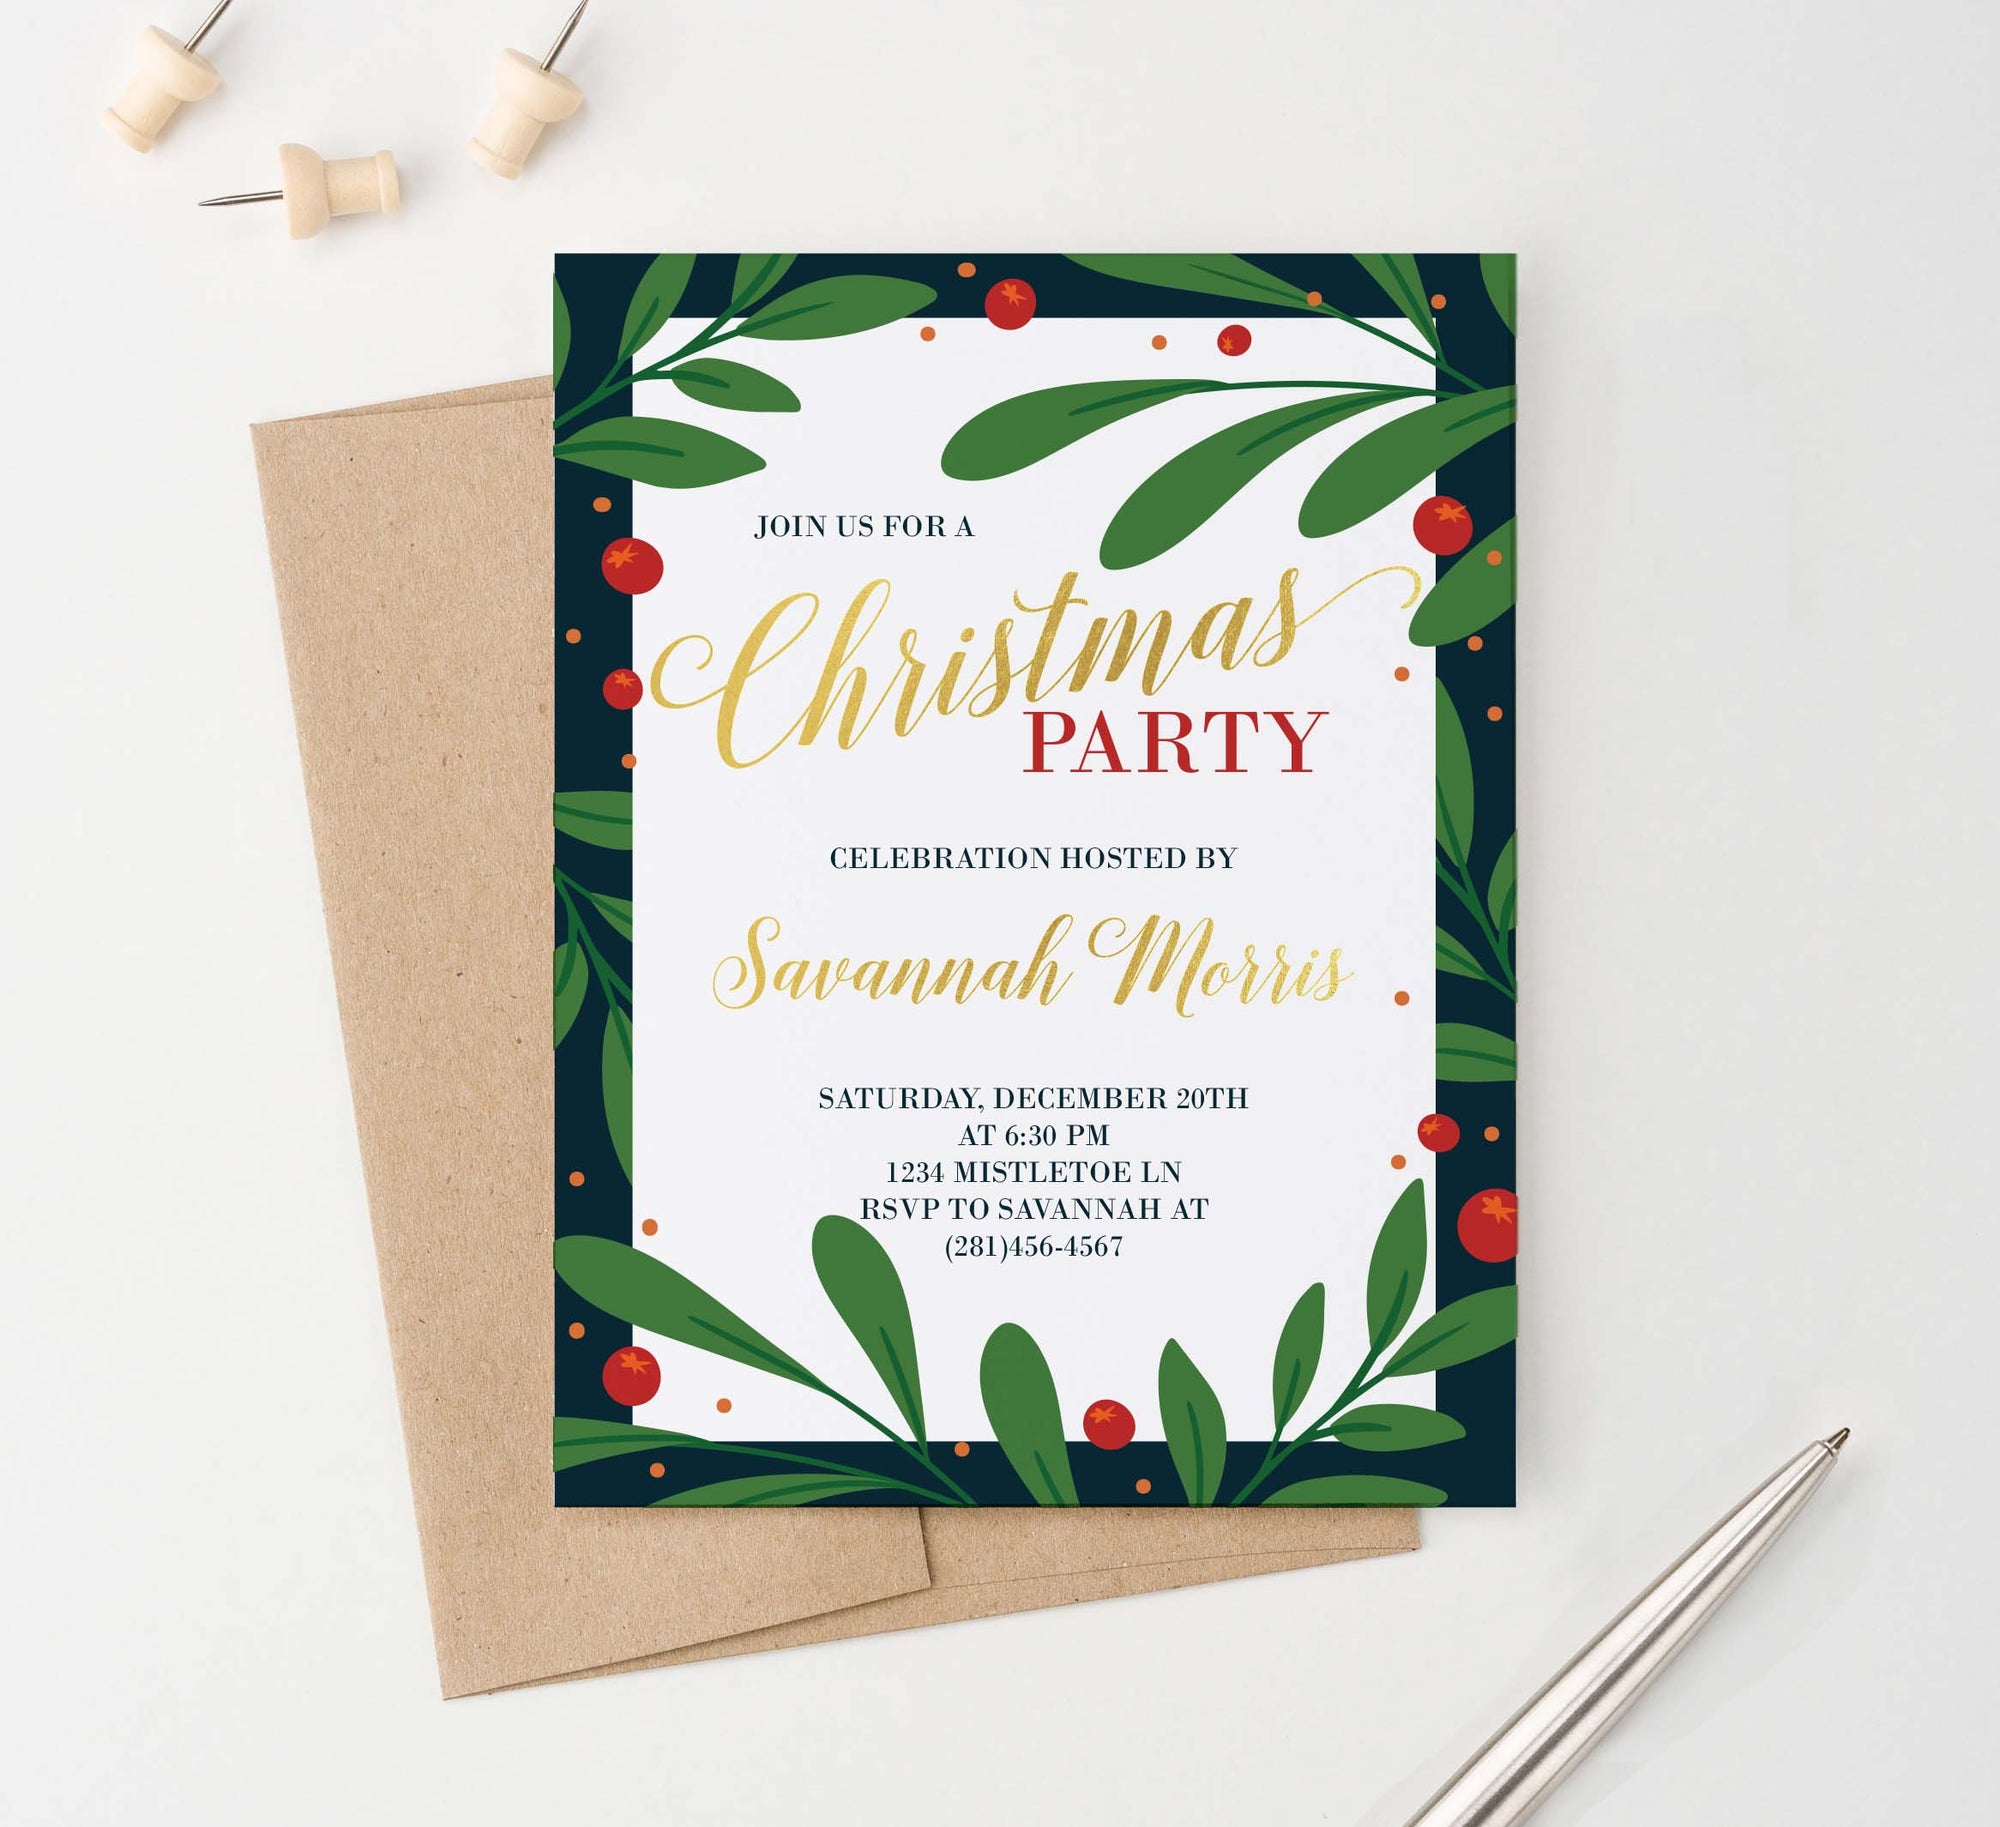 CPI006 elegant holly framed holiday party invitations personalized christmas merry